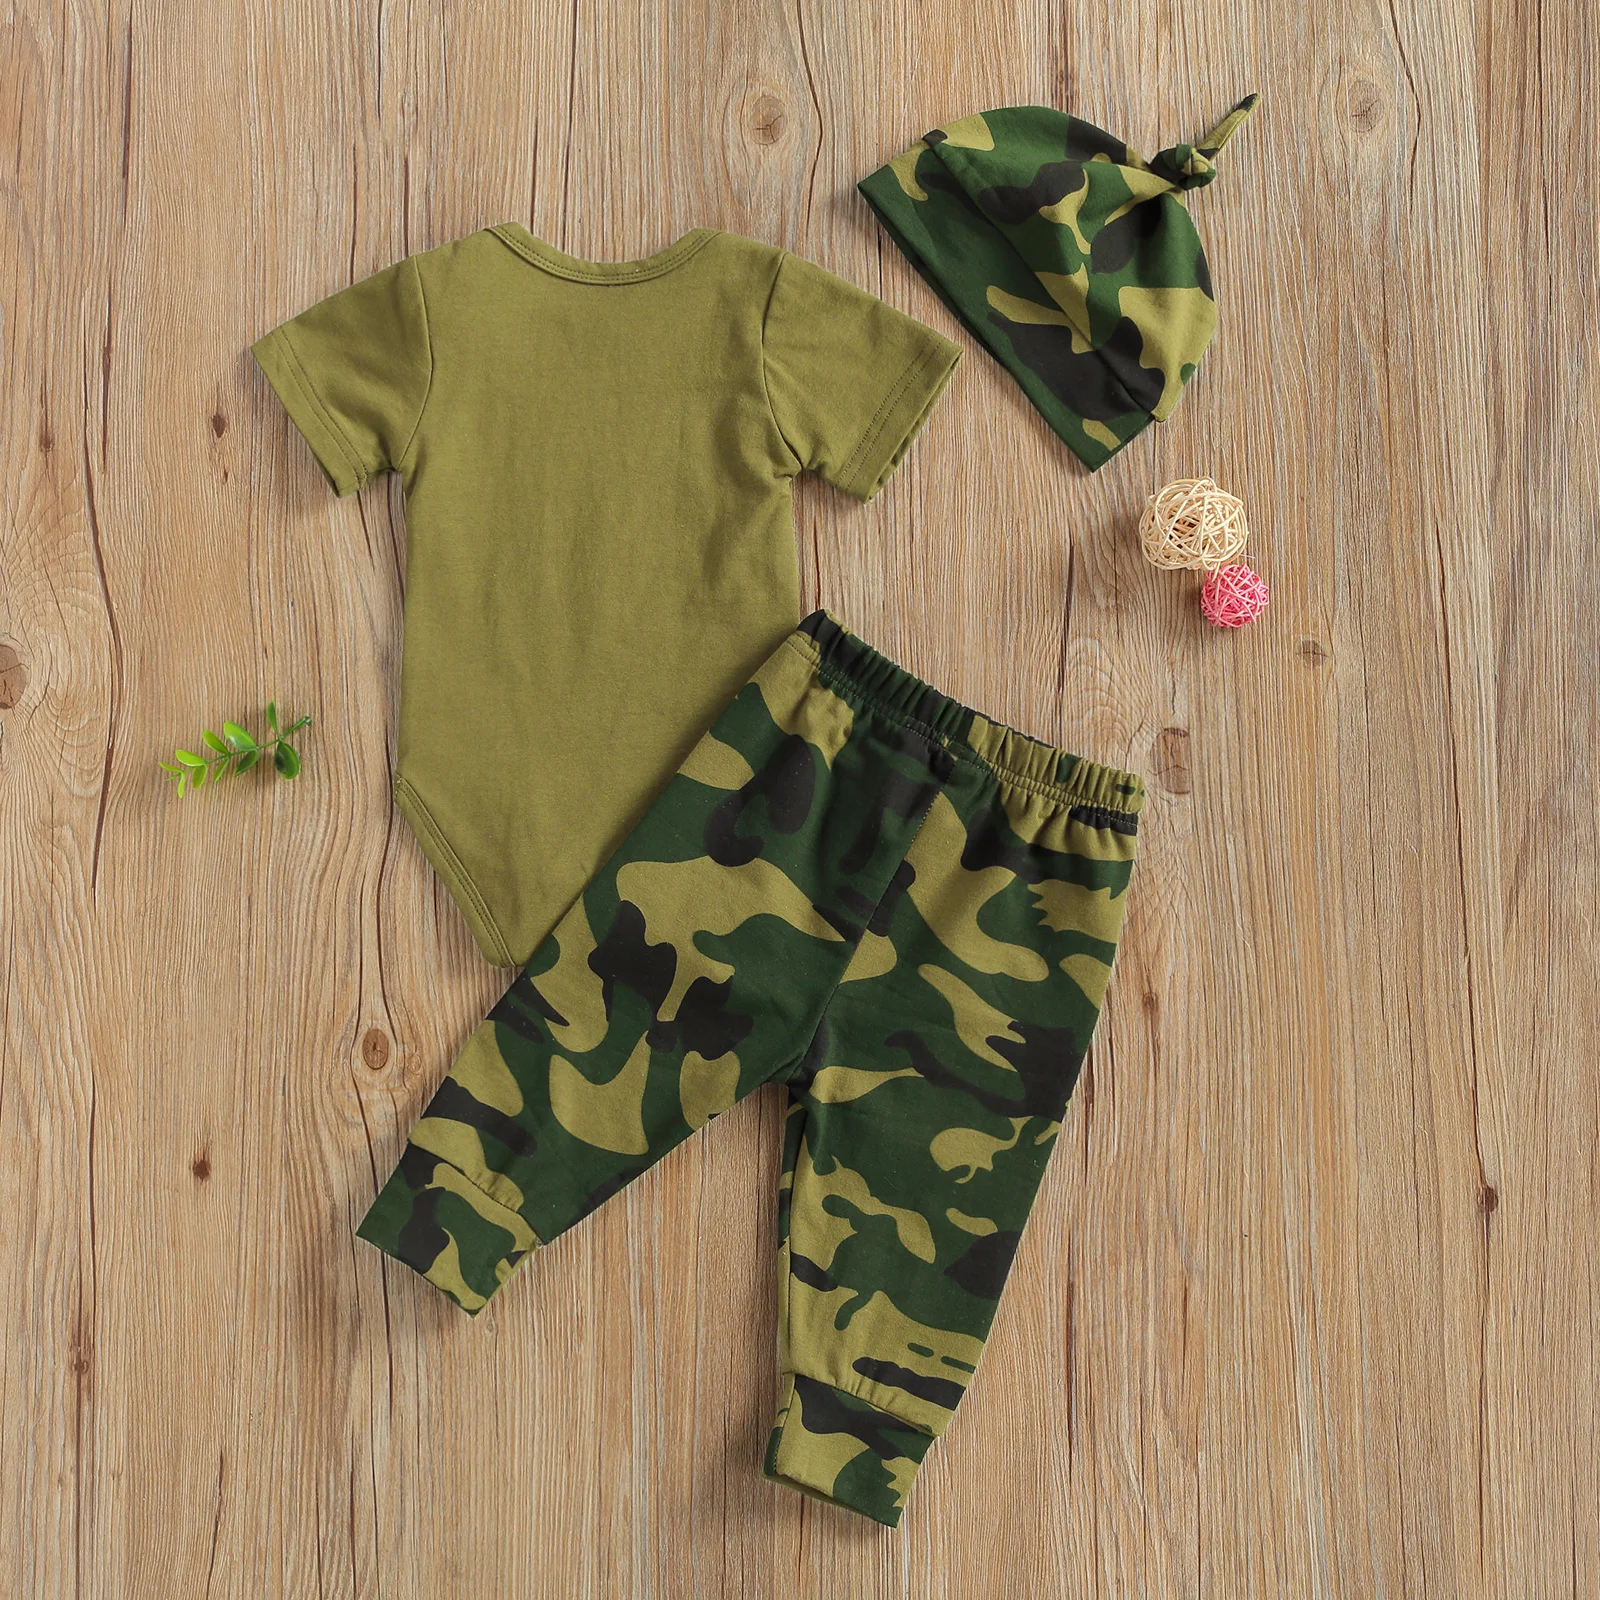 

0-18M Infant Baby Boy 3pcs Clothing Romper Letter Print Short Sleeve Triangle Playsuit+Camouflage Long Pants+Hat for Summer 2021